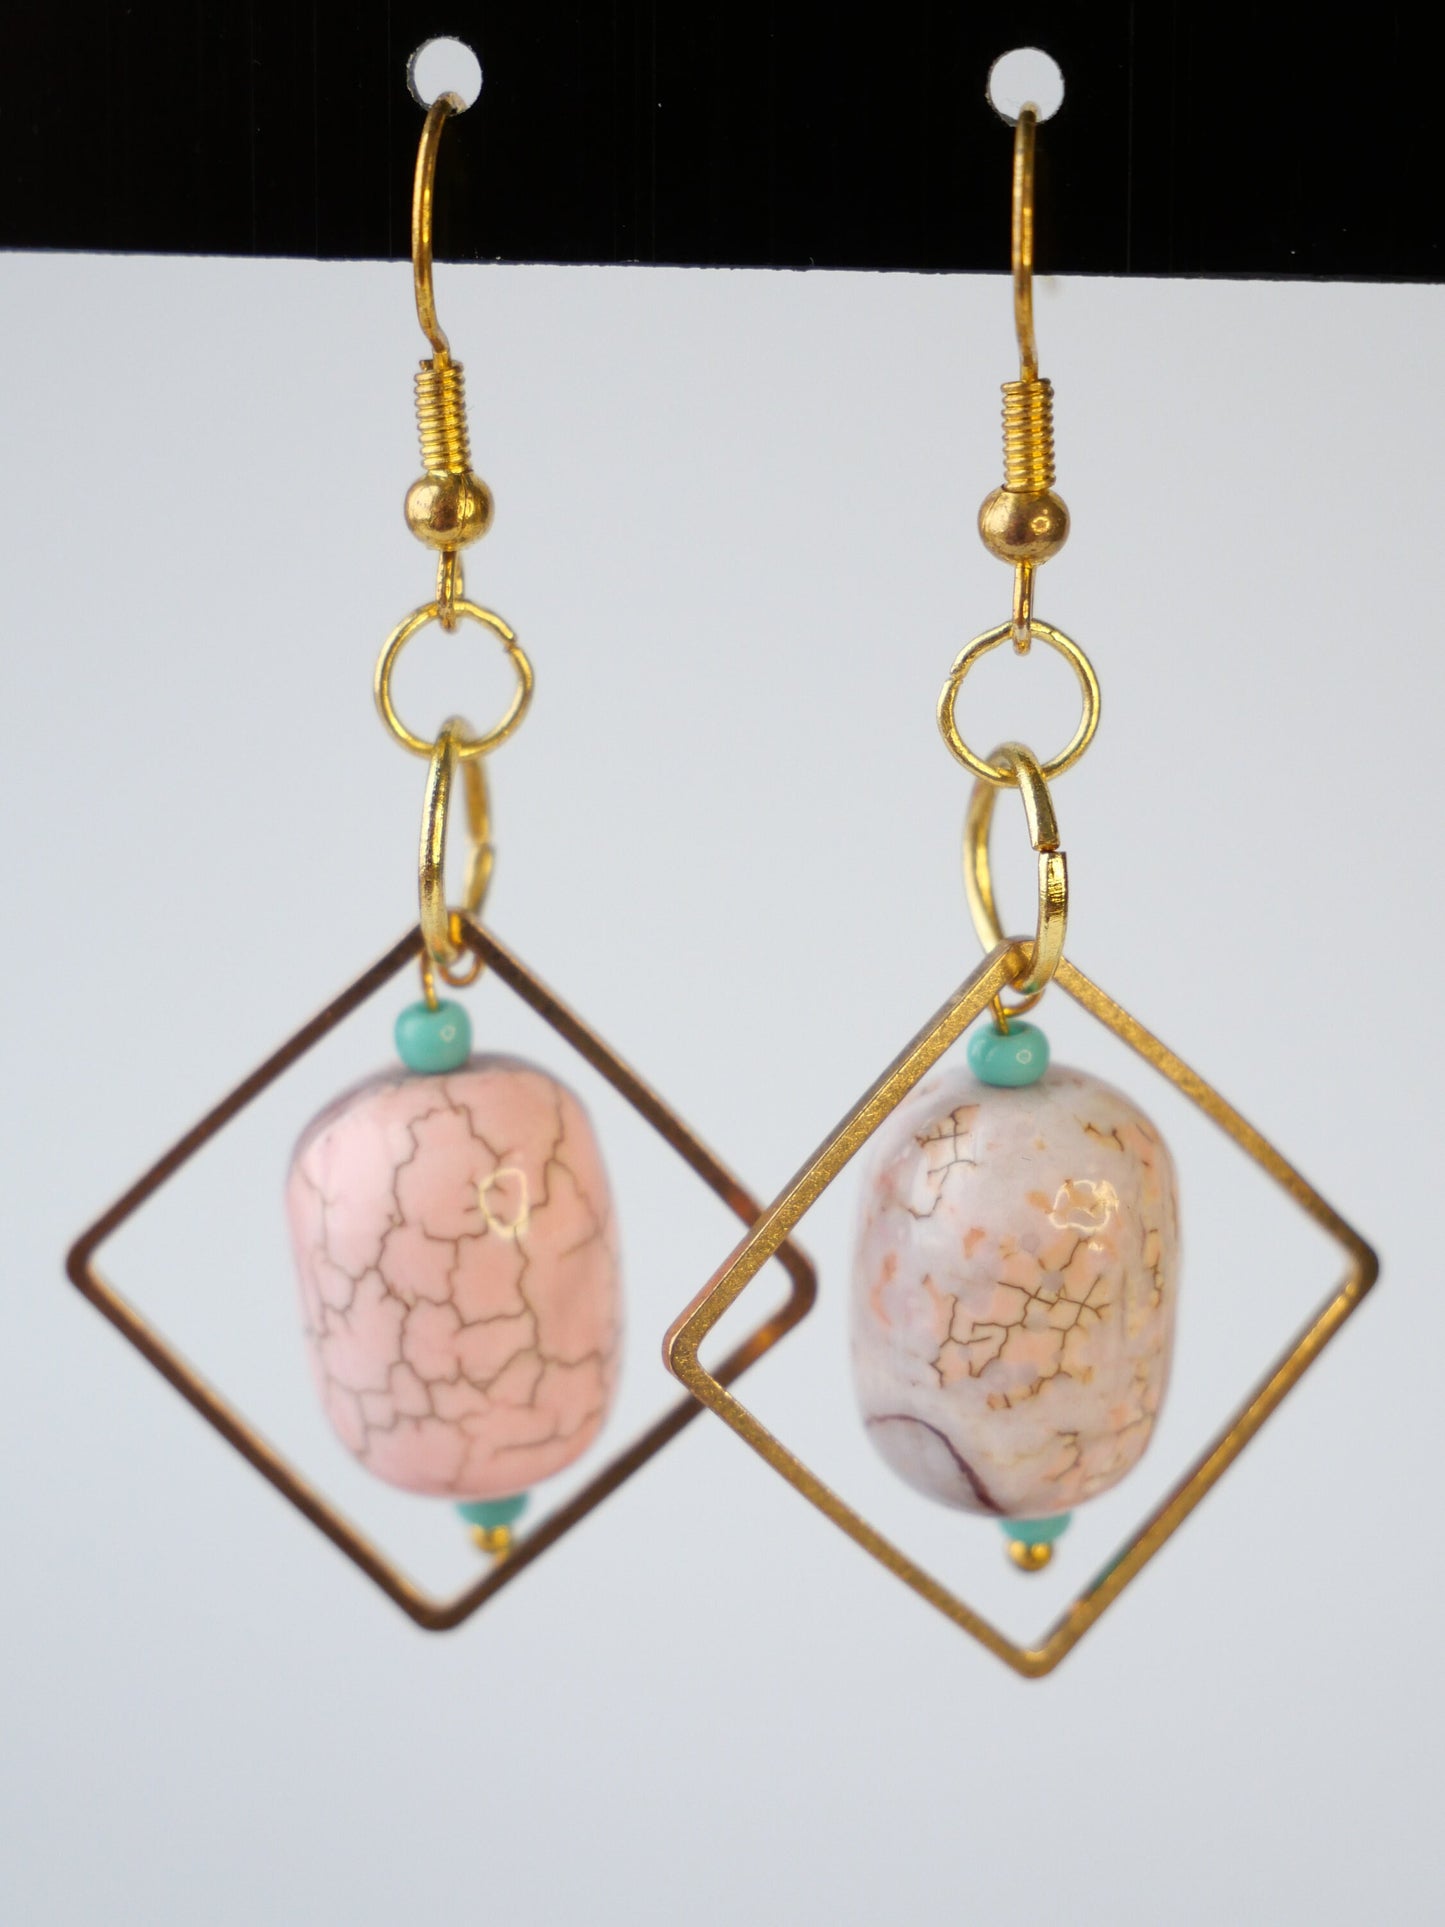 Gold, Geometric, Pink Magnesite Dangle Earrings, Hypoallergenic, Made in Maine, Inspired by Maine